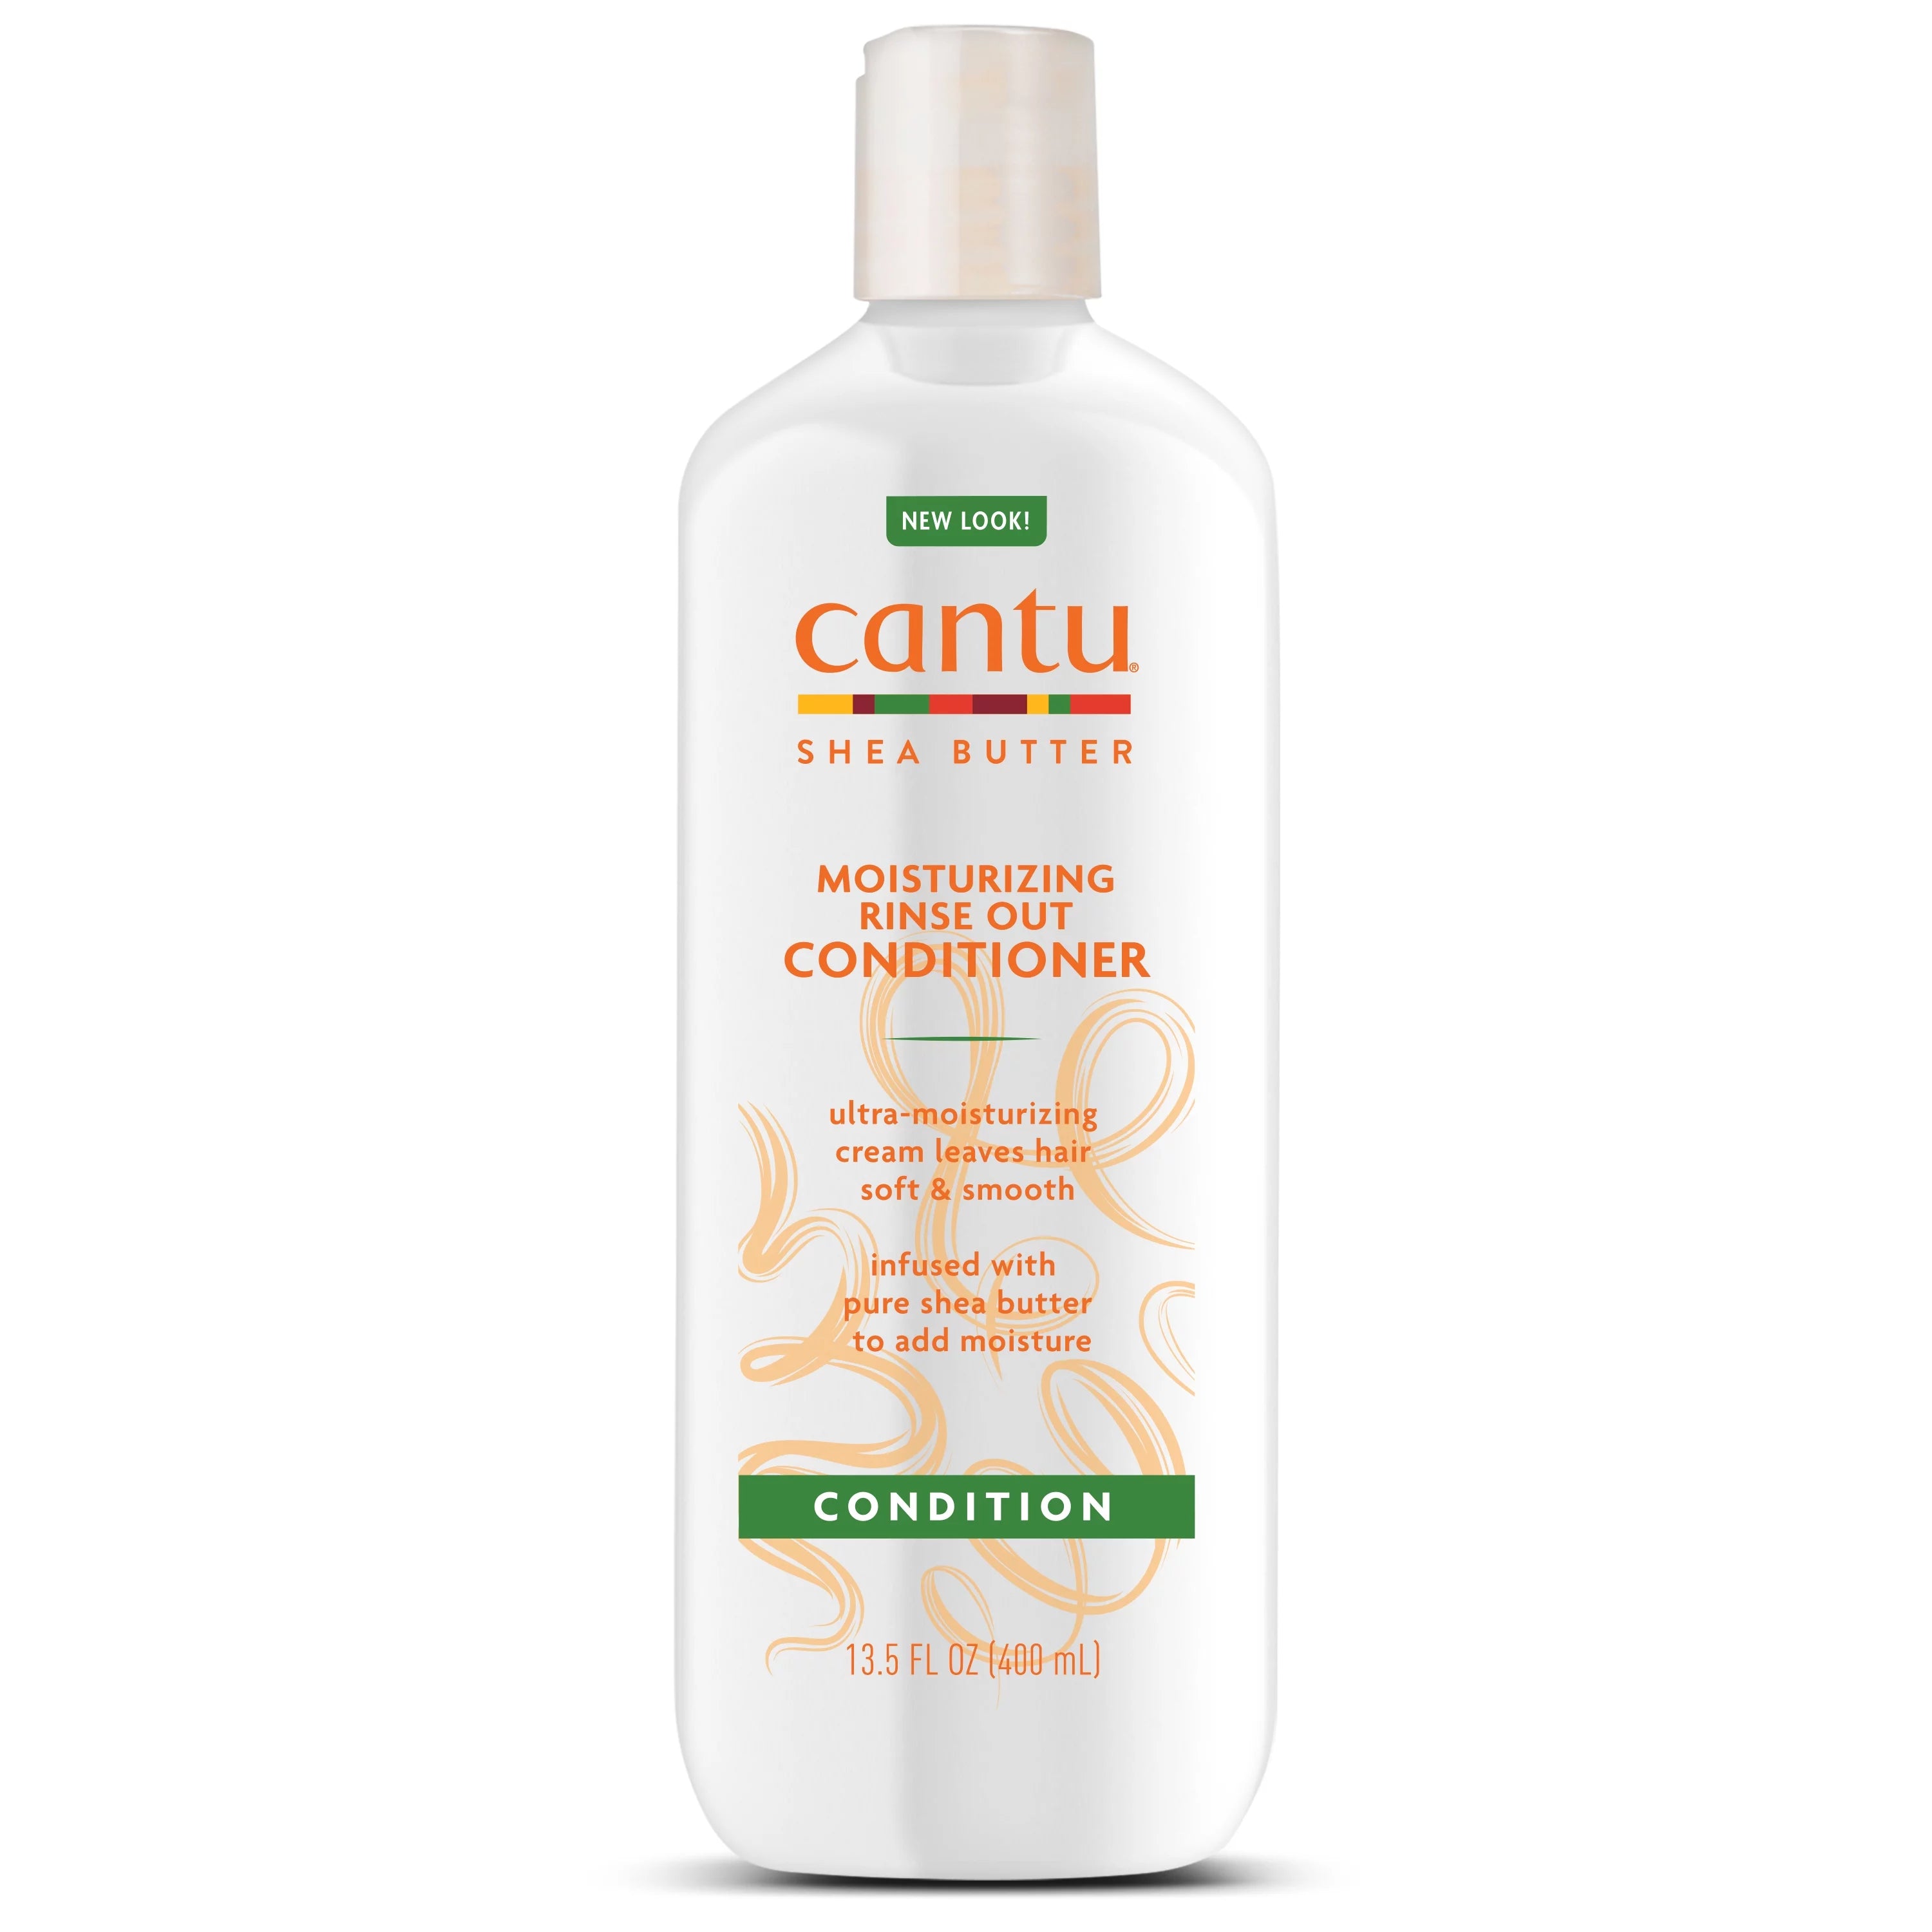 Cantu Moisturizing Rinse Out Conditioner with Shea Butter